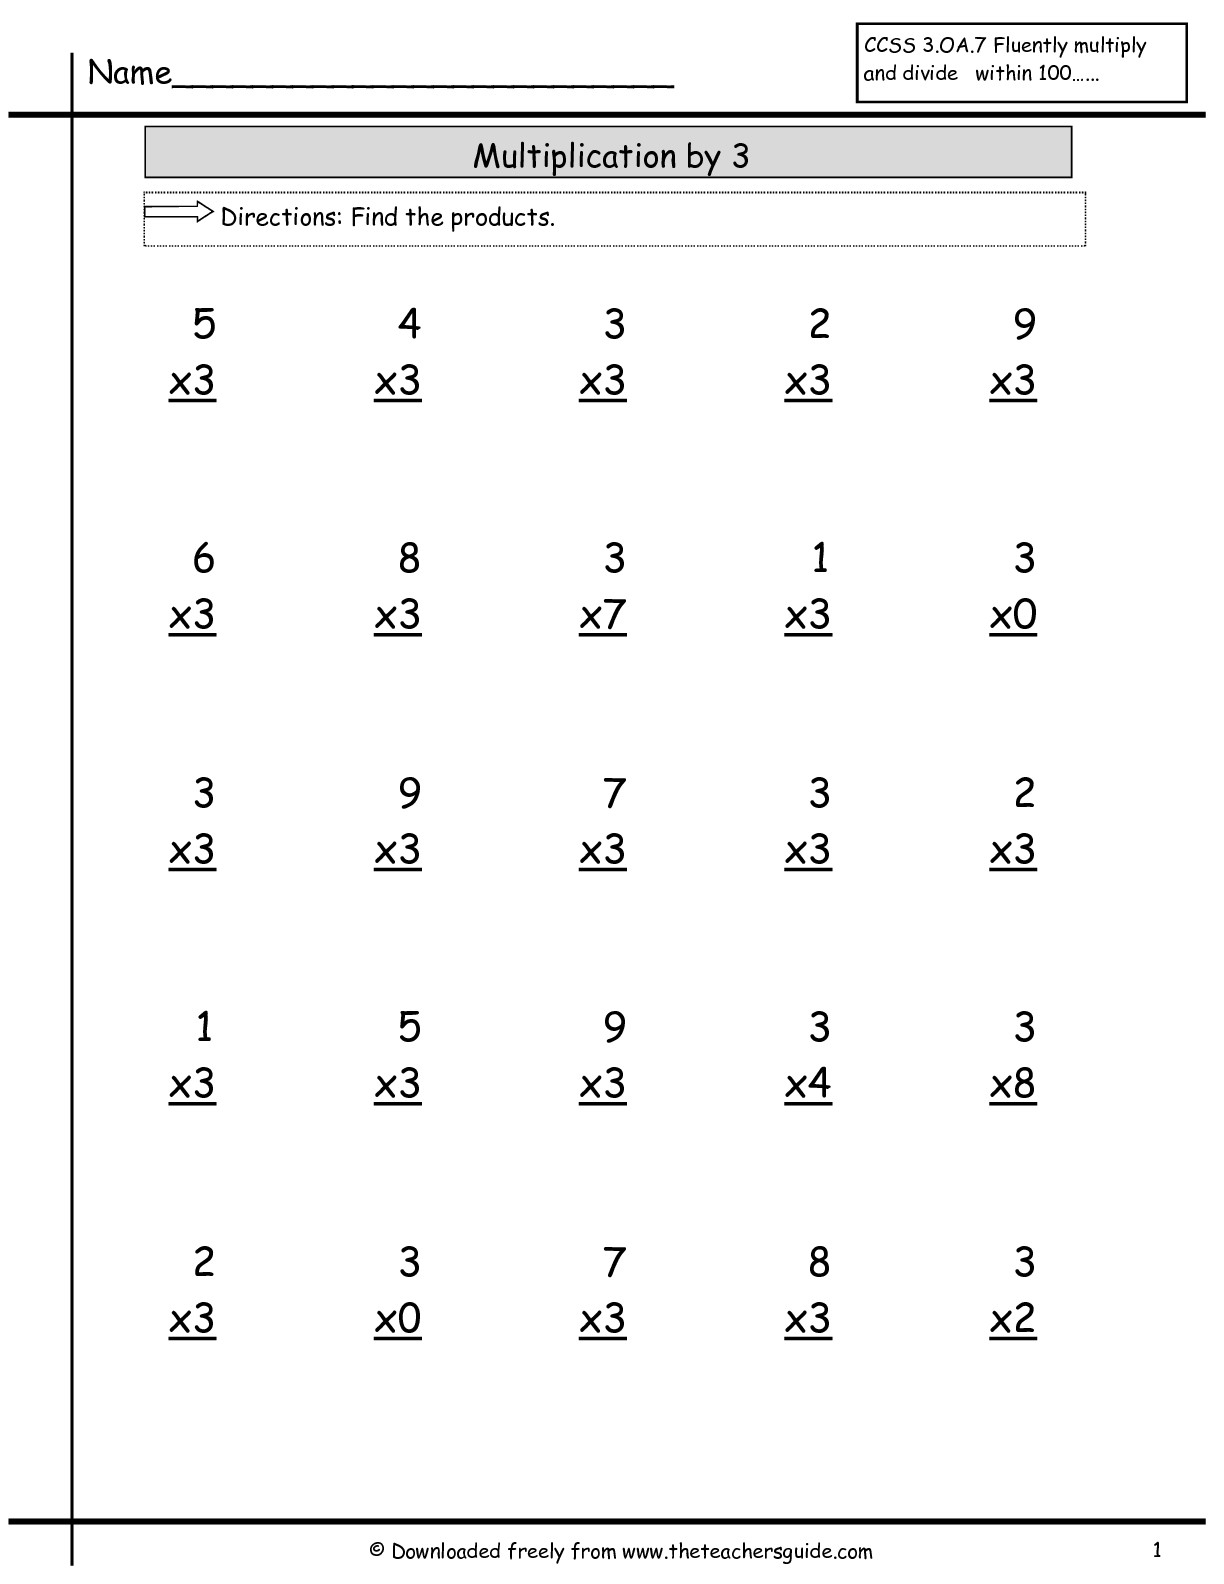 Multiplication Facts Worksheets From The Teacher&amp;#039;s Guide throughout Multiplication Worksheets Number 3